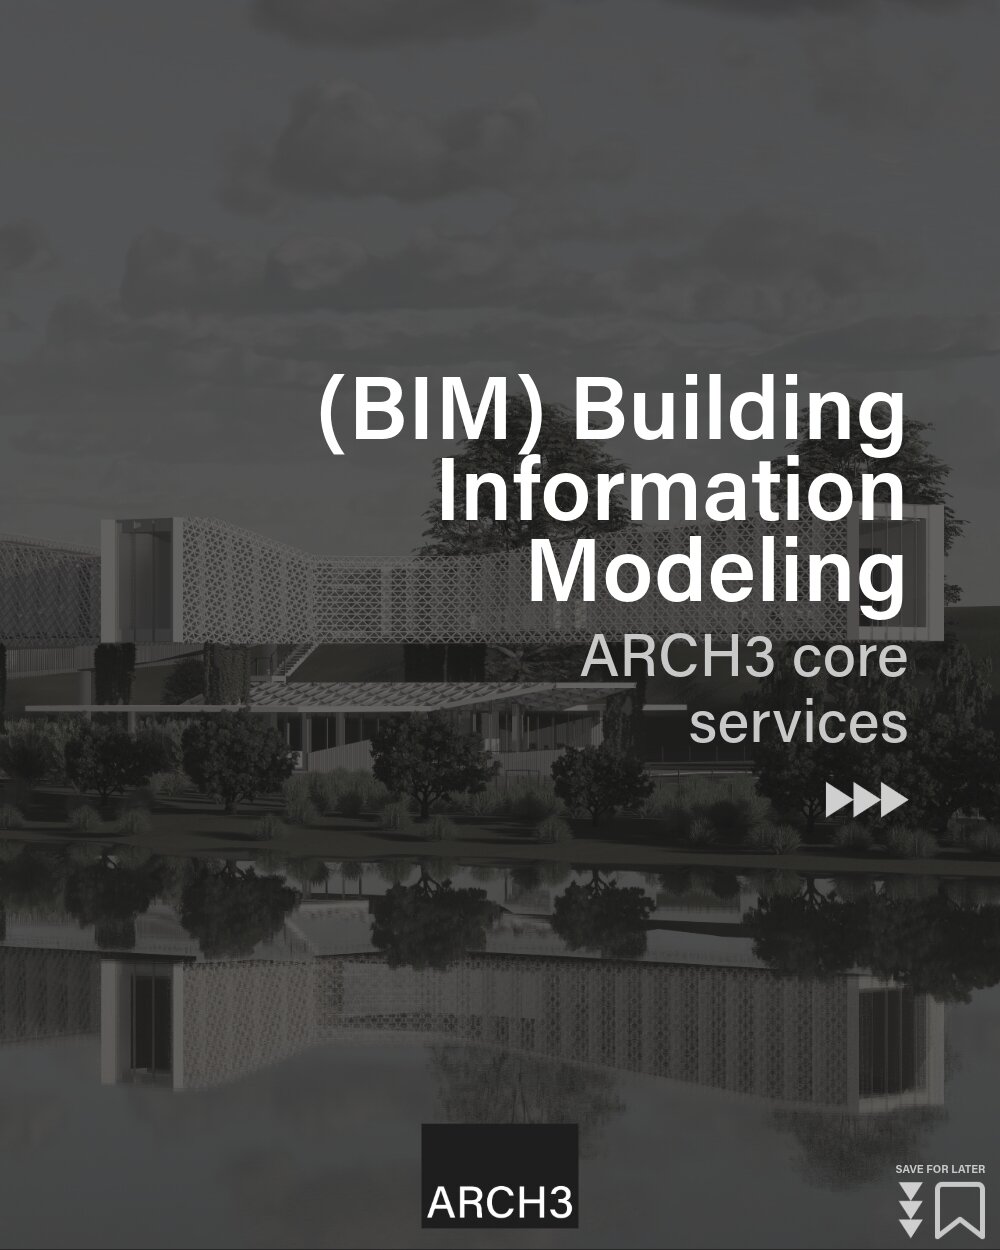 Discover BIM with ARCH3.

We specialise in creating digital BIM models for all projects which assists with informed decision making at every stage of the project. FInd out more in this post.